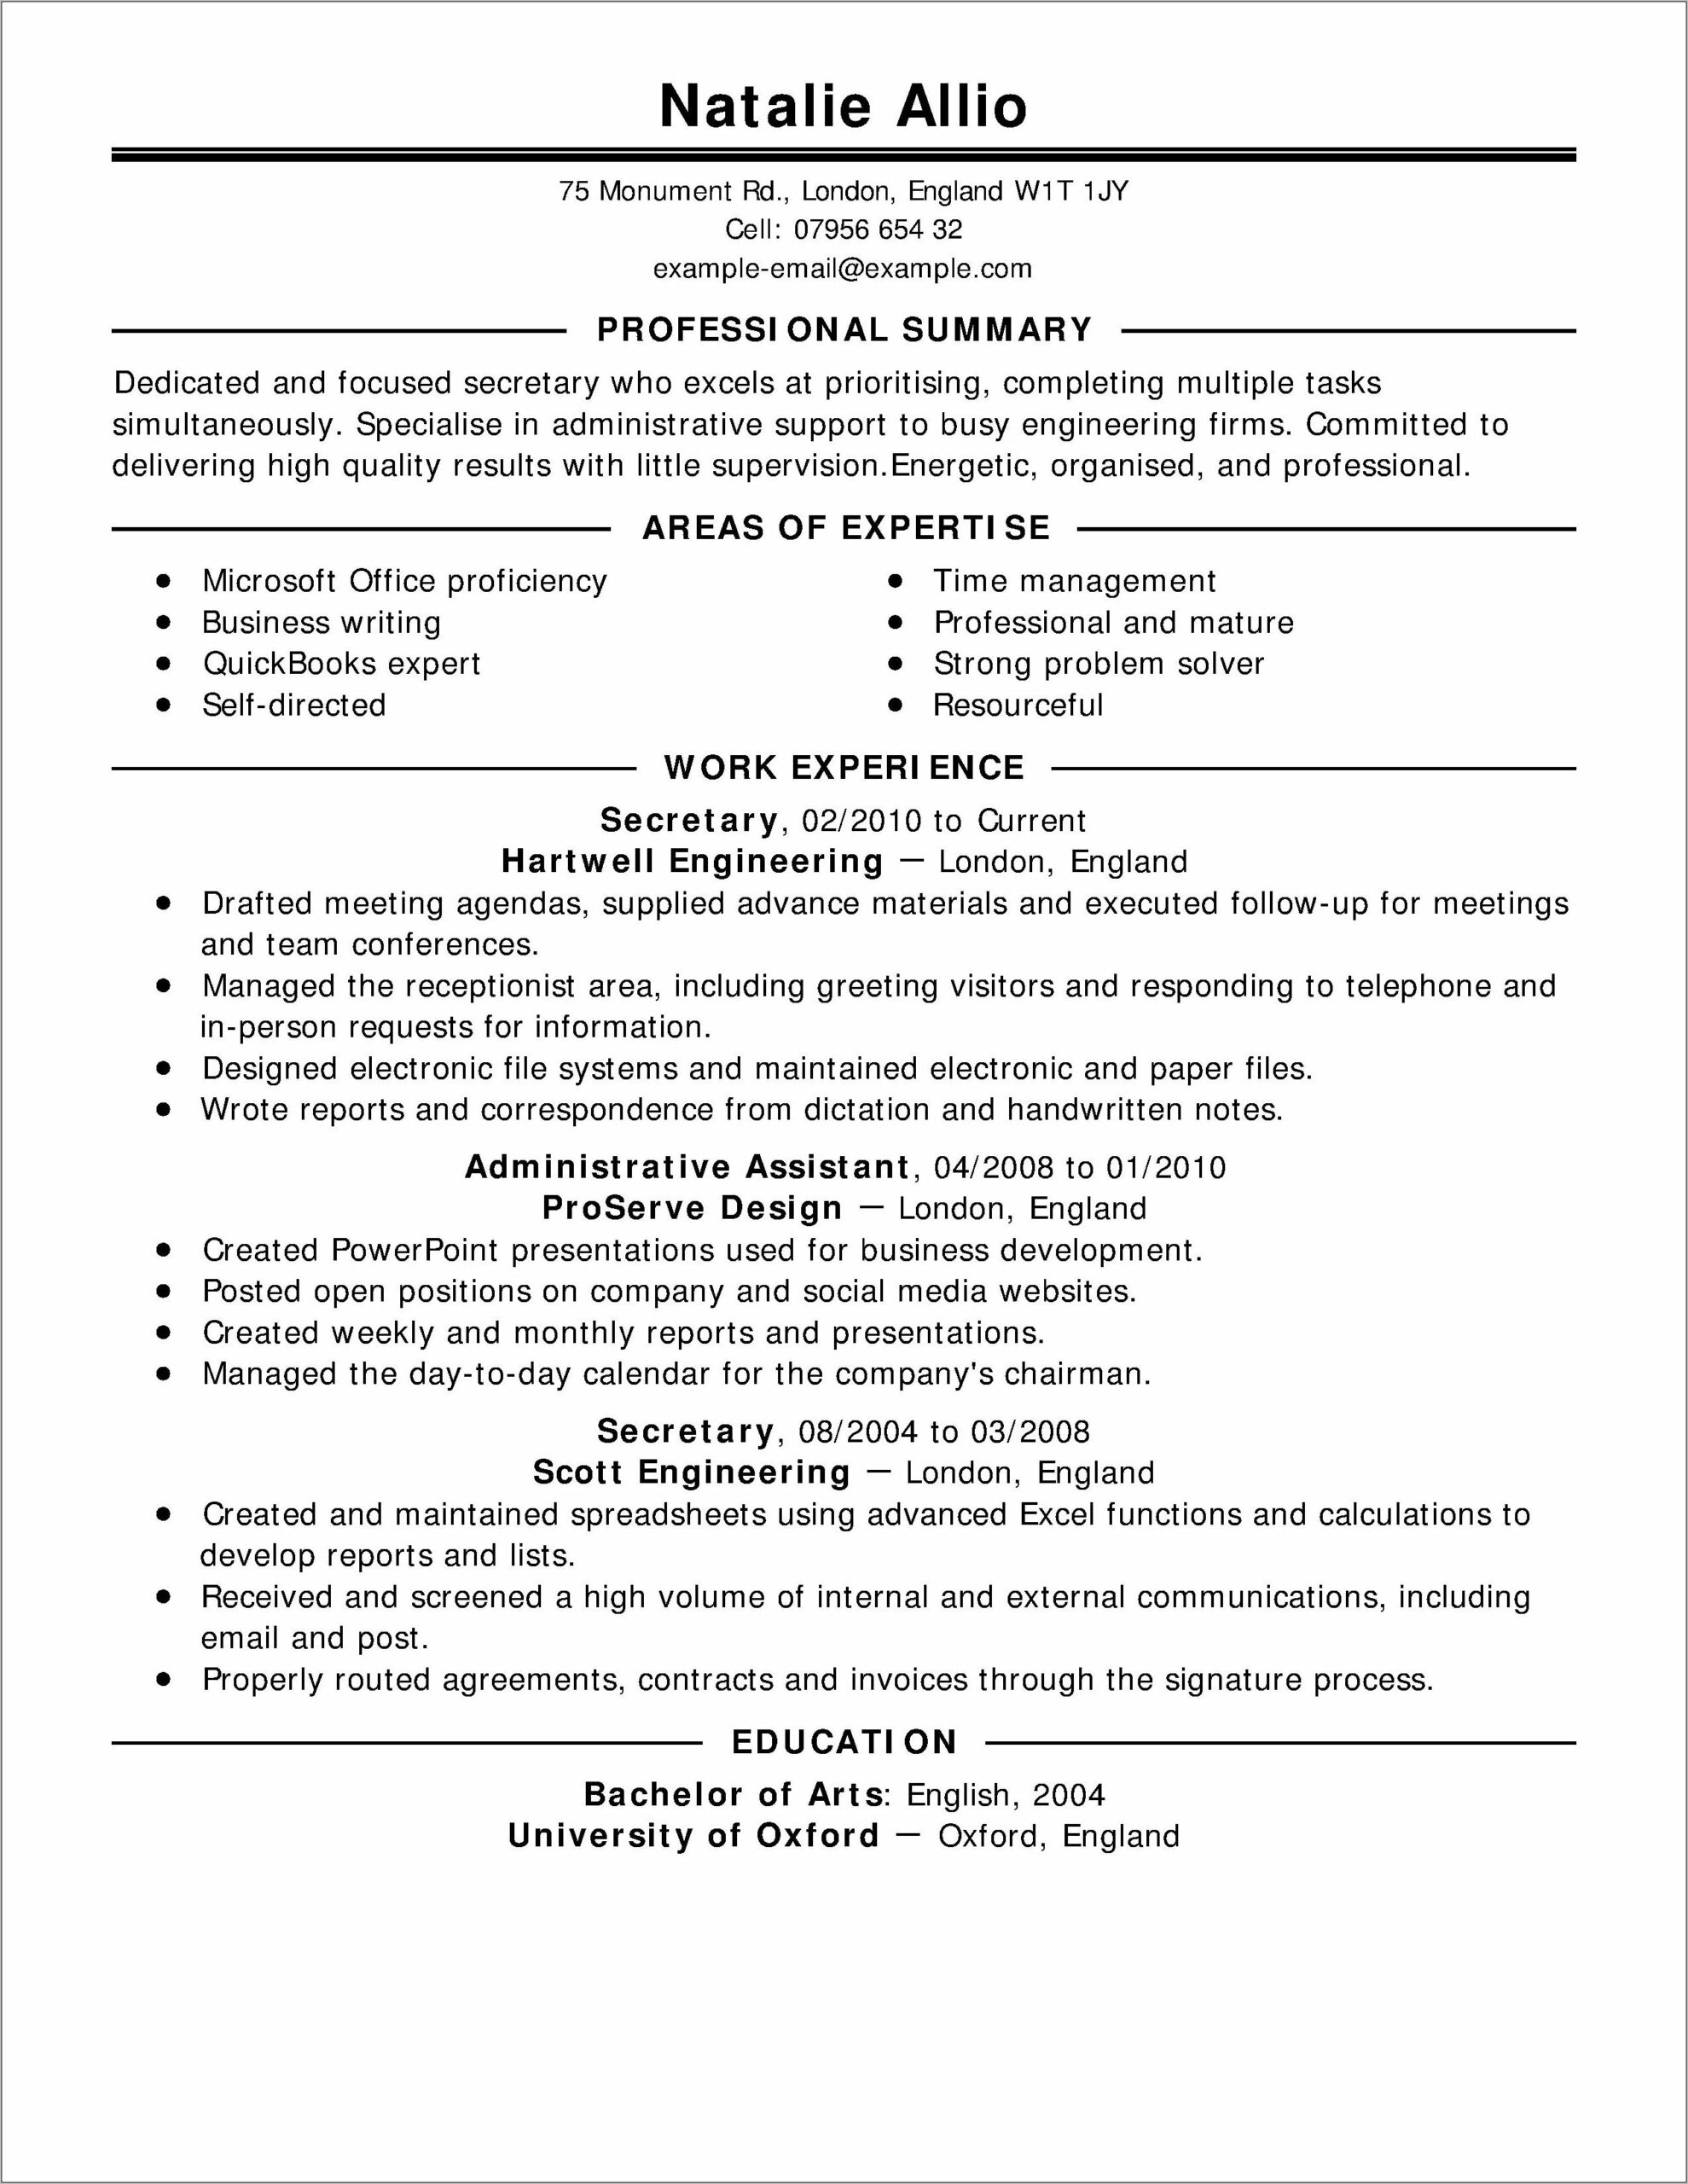 Resume Objective Examples For College Admission